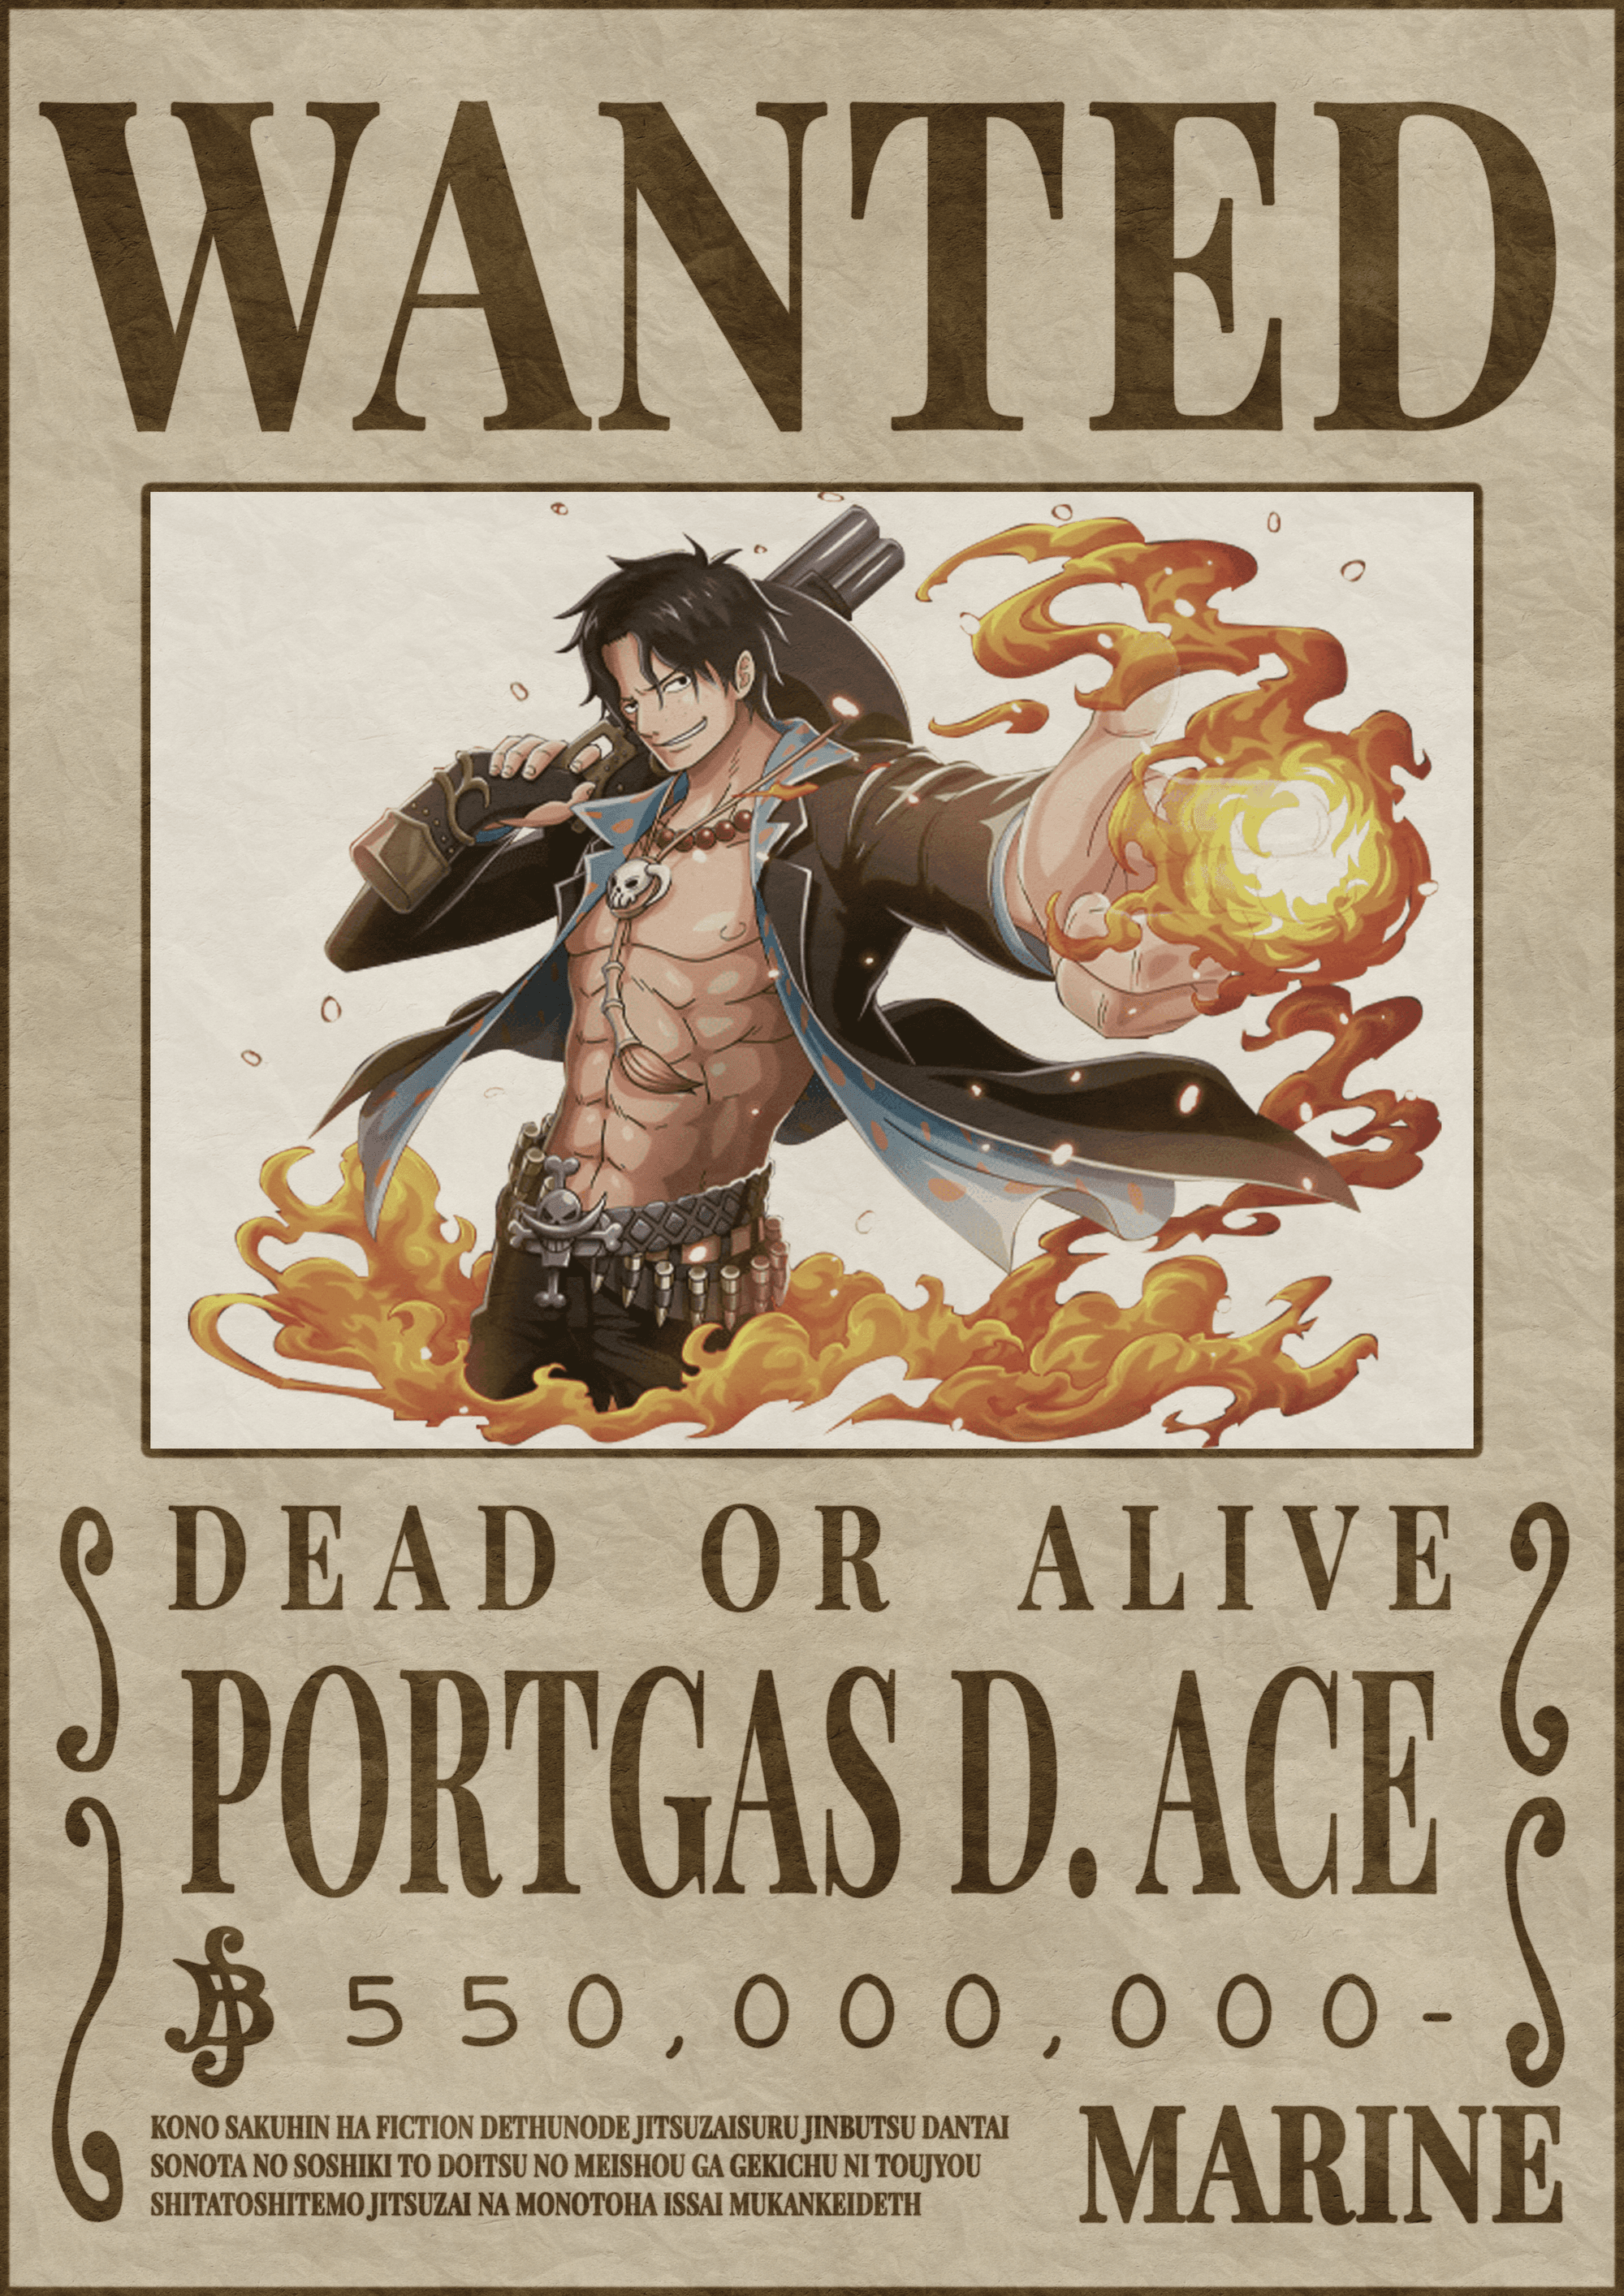 WANTED - Portgas D. Ace - One Piece - One Piece - Wanted